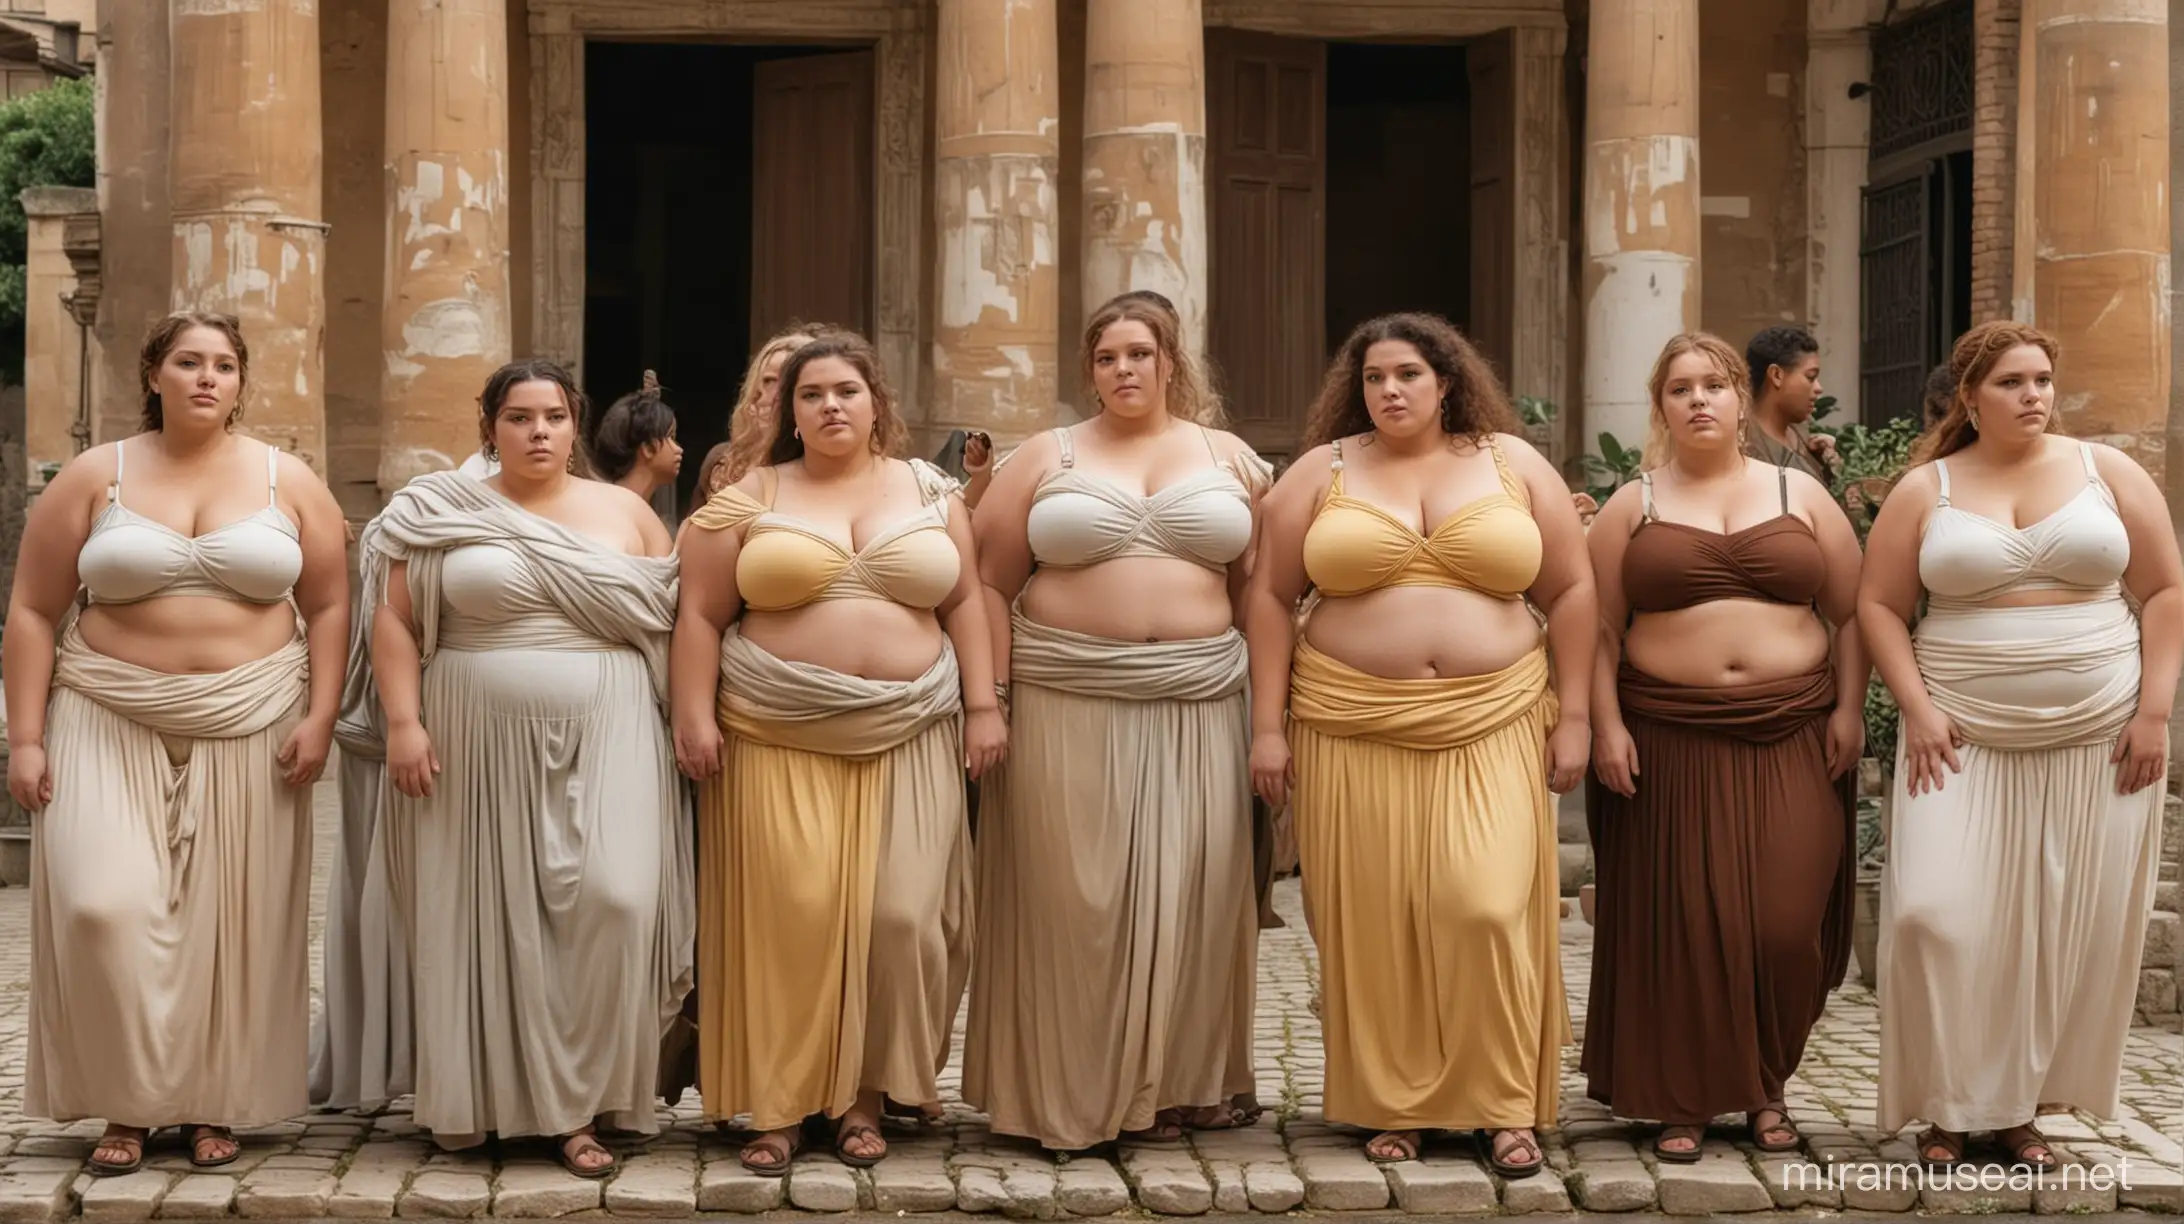 A group of young, beautiful SSBBW women, weight 400 lbs, standing in a porch in ancient Rome. The women are of different ethnicities  and of different hair and skin color. Some men look at them and talk